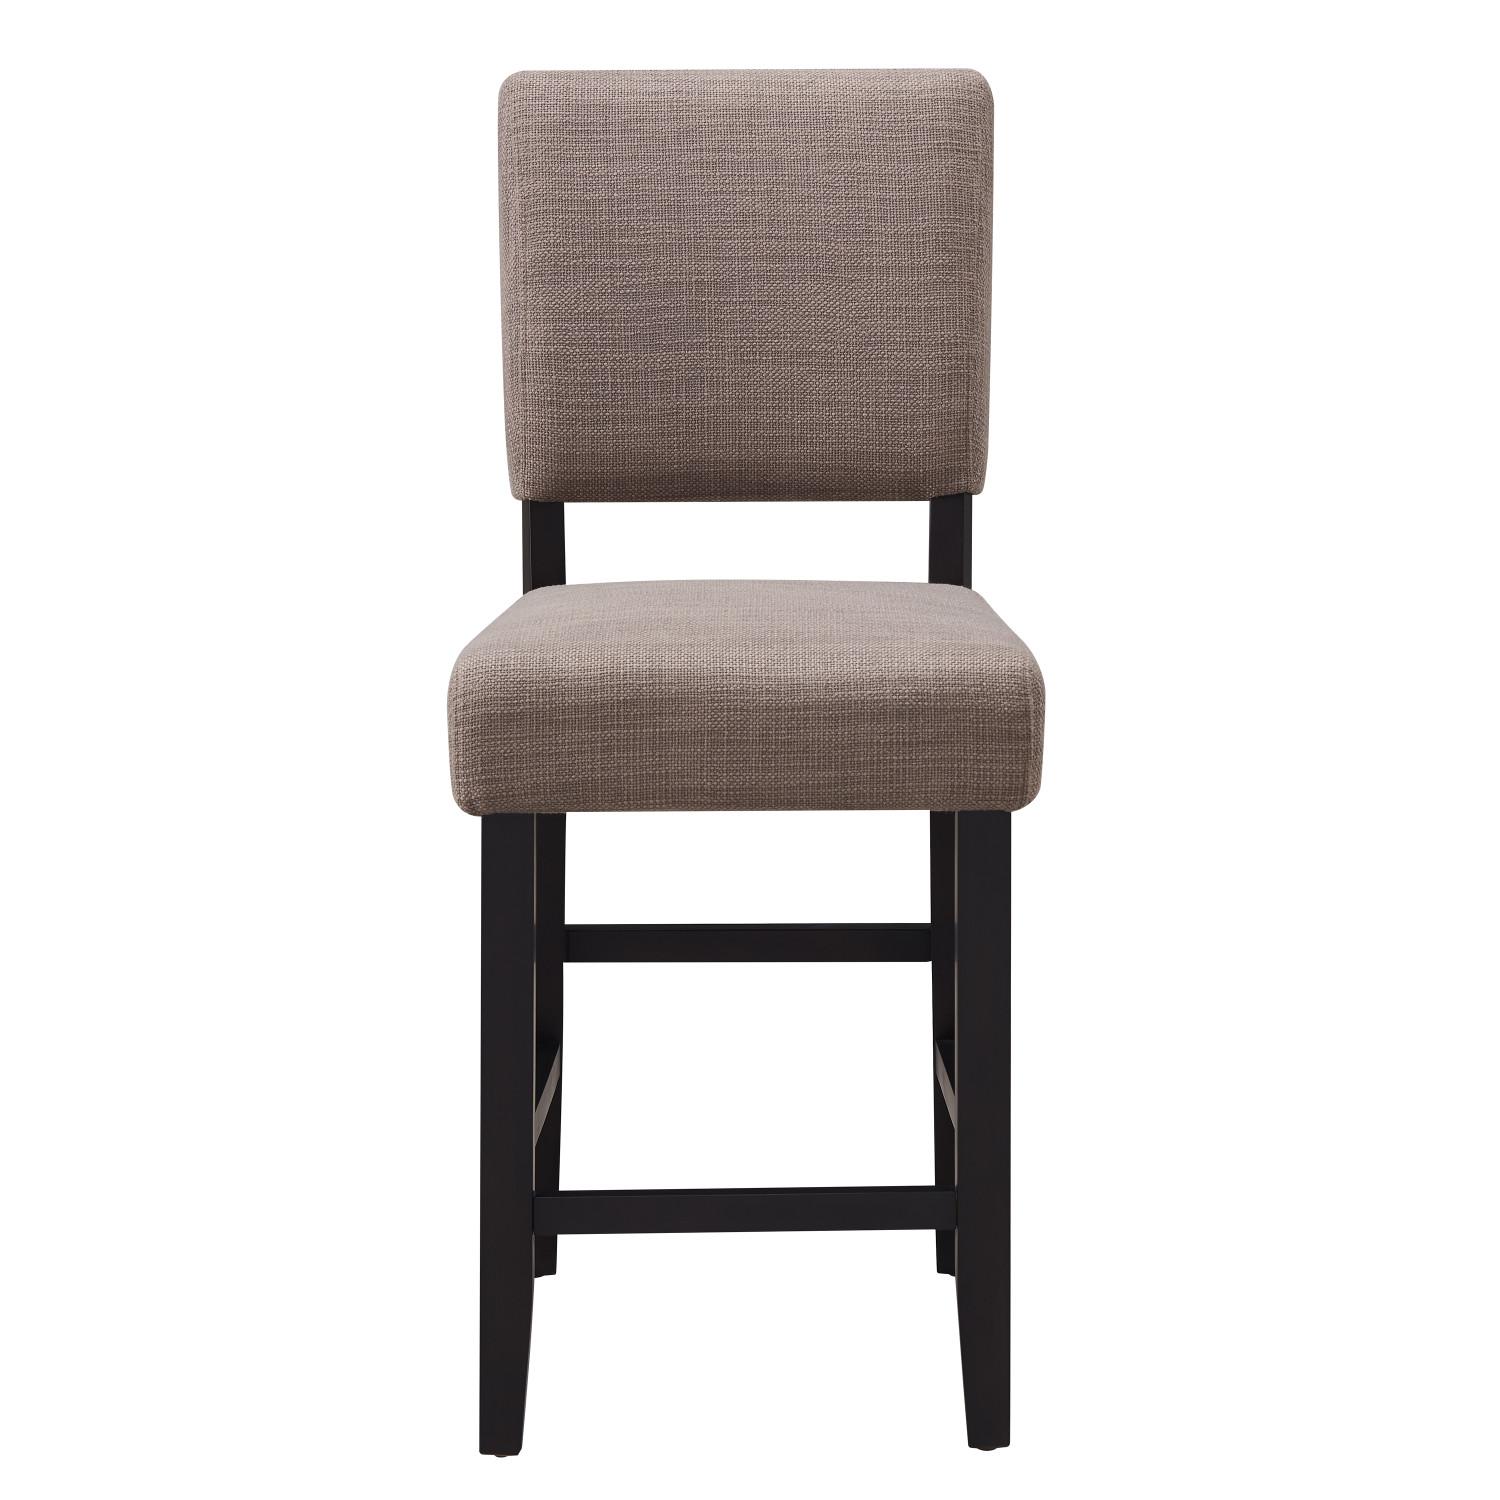 Leick Home, Leick Home 10086-BLKGL Counter Stool in Black and Gray Set of 2 New